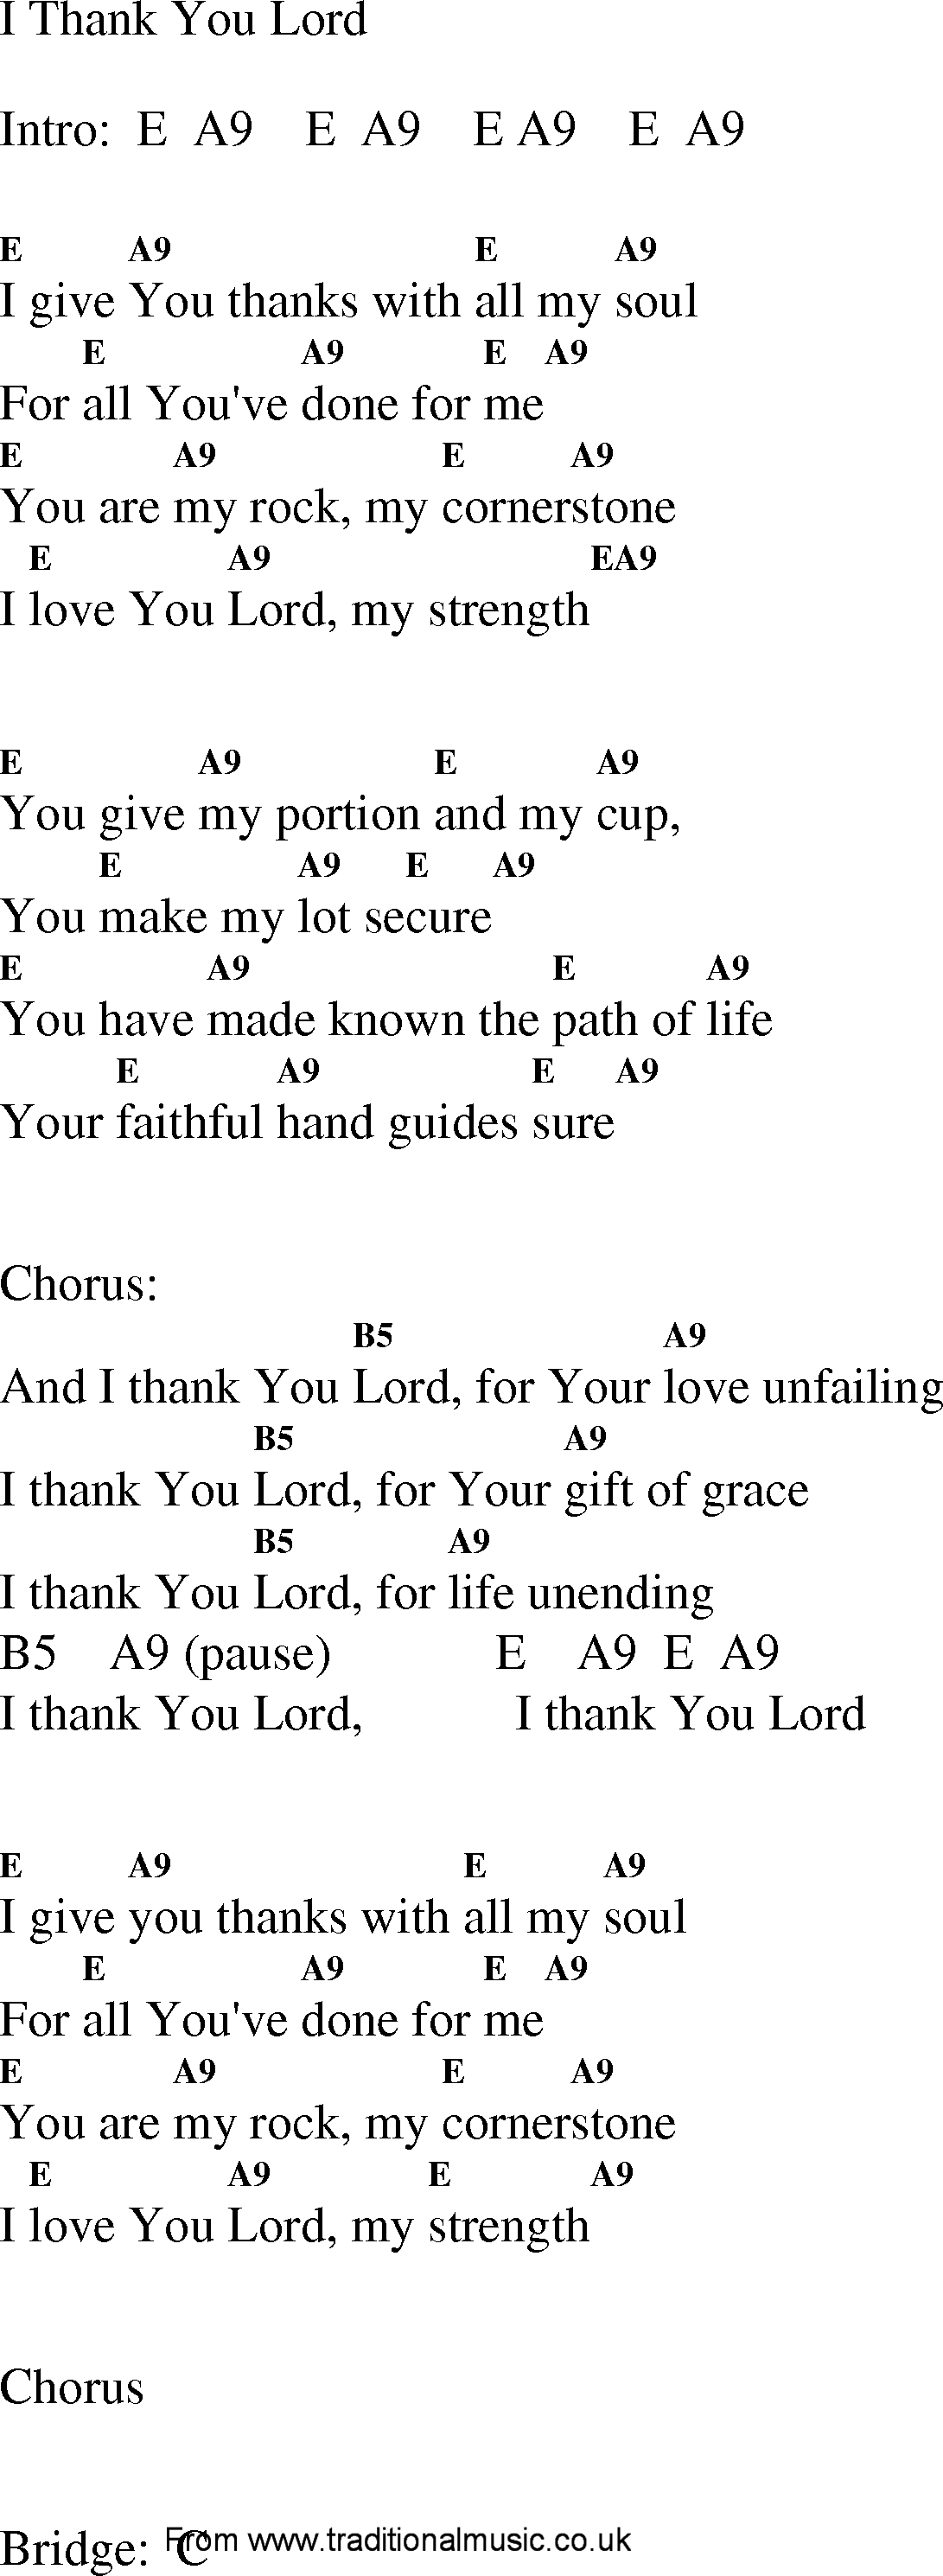 Gospel Song: i_thank_you_lord, lyrics and chords.